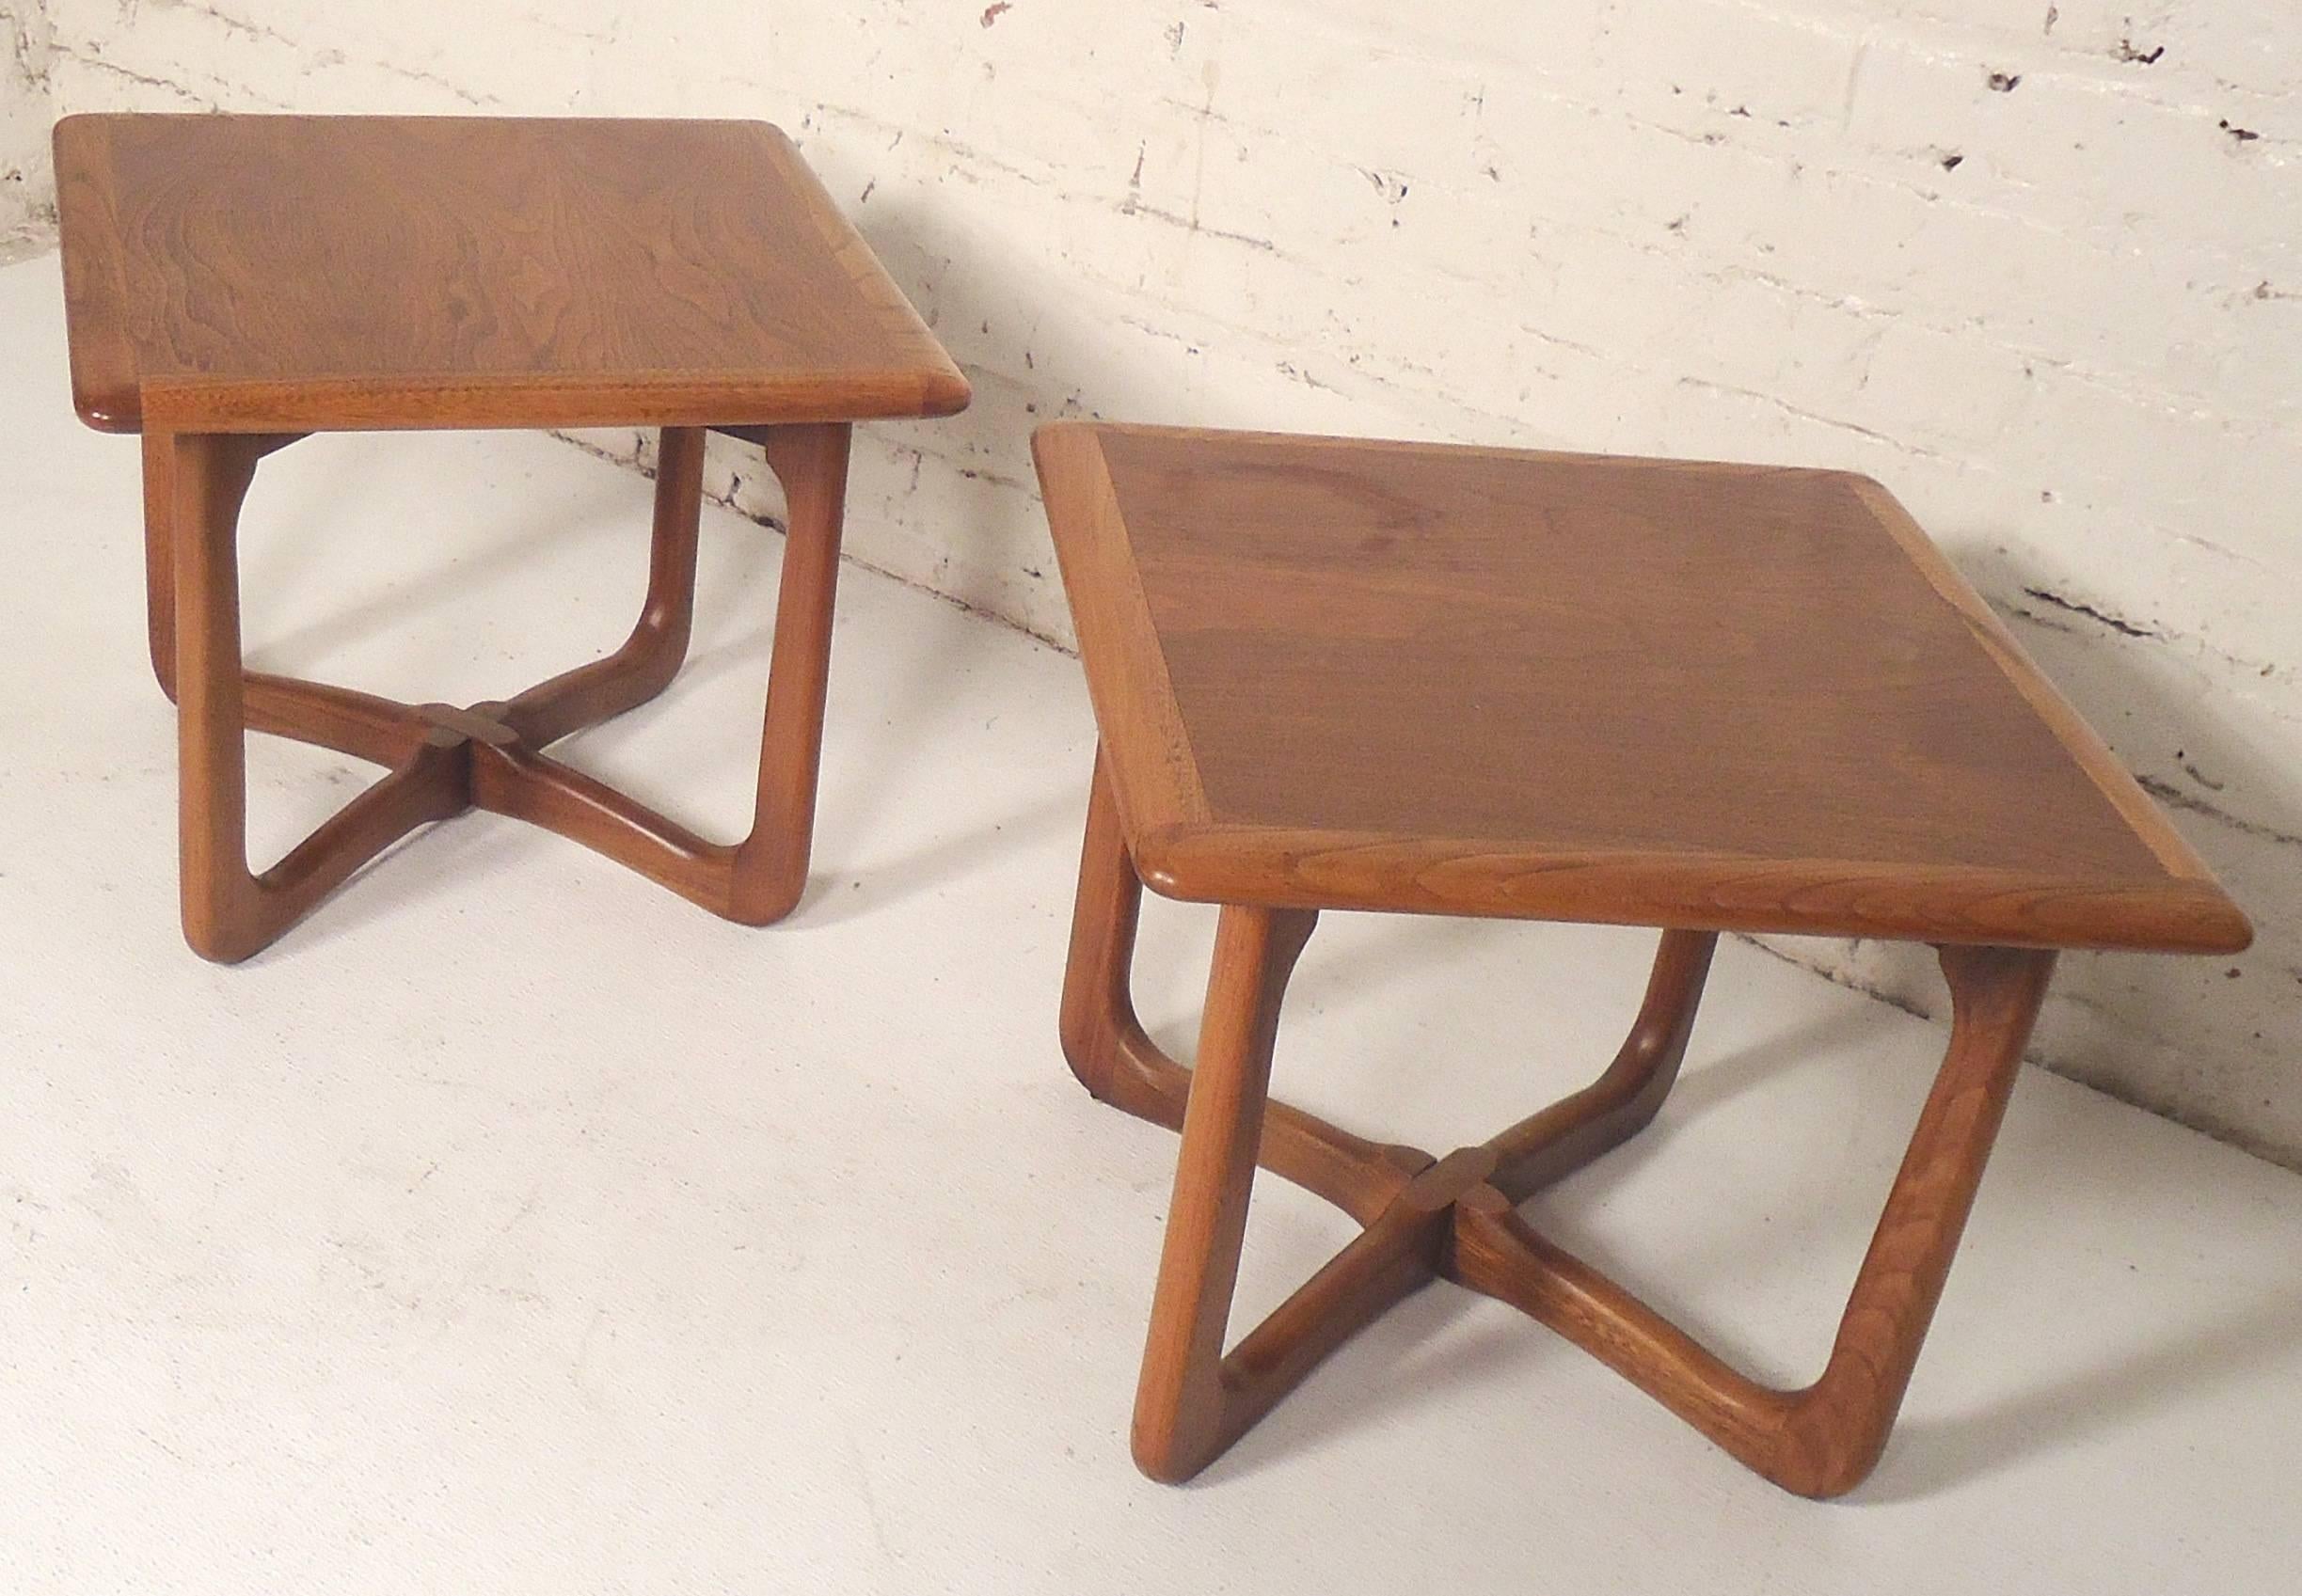 Two square two-tone wood tables by Lane Acclaim. Nicely sculpted bases with walnut and oak grain on top.

(Please confirm item location - NY or NJ - with dealer).
 